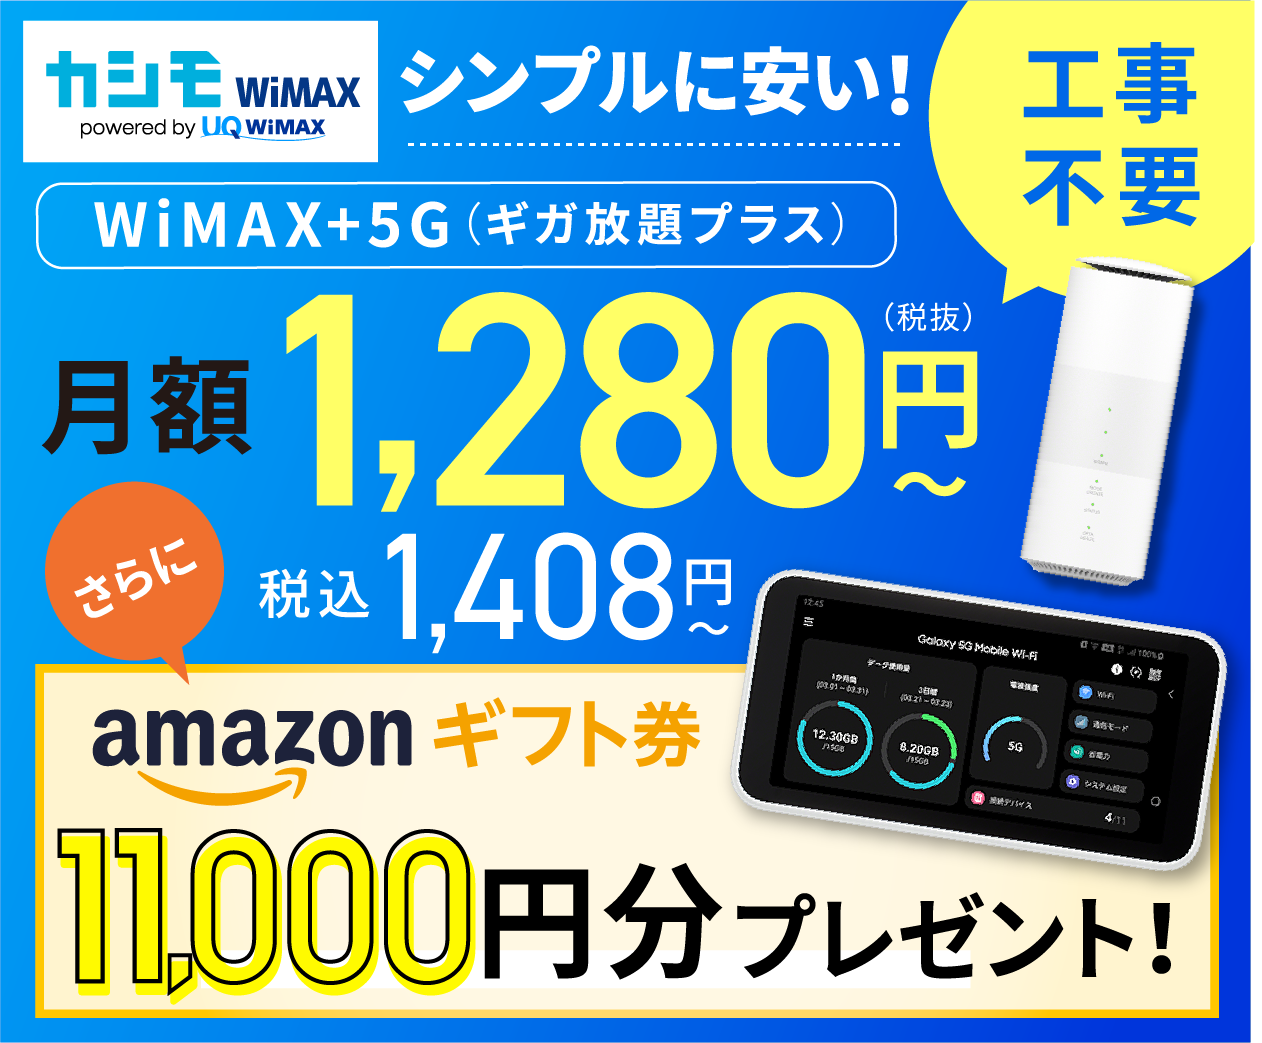 Wimaxのオプションの解約方法を解説 メリット デメリットや注意点も紹介 Iphone格安sim通信